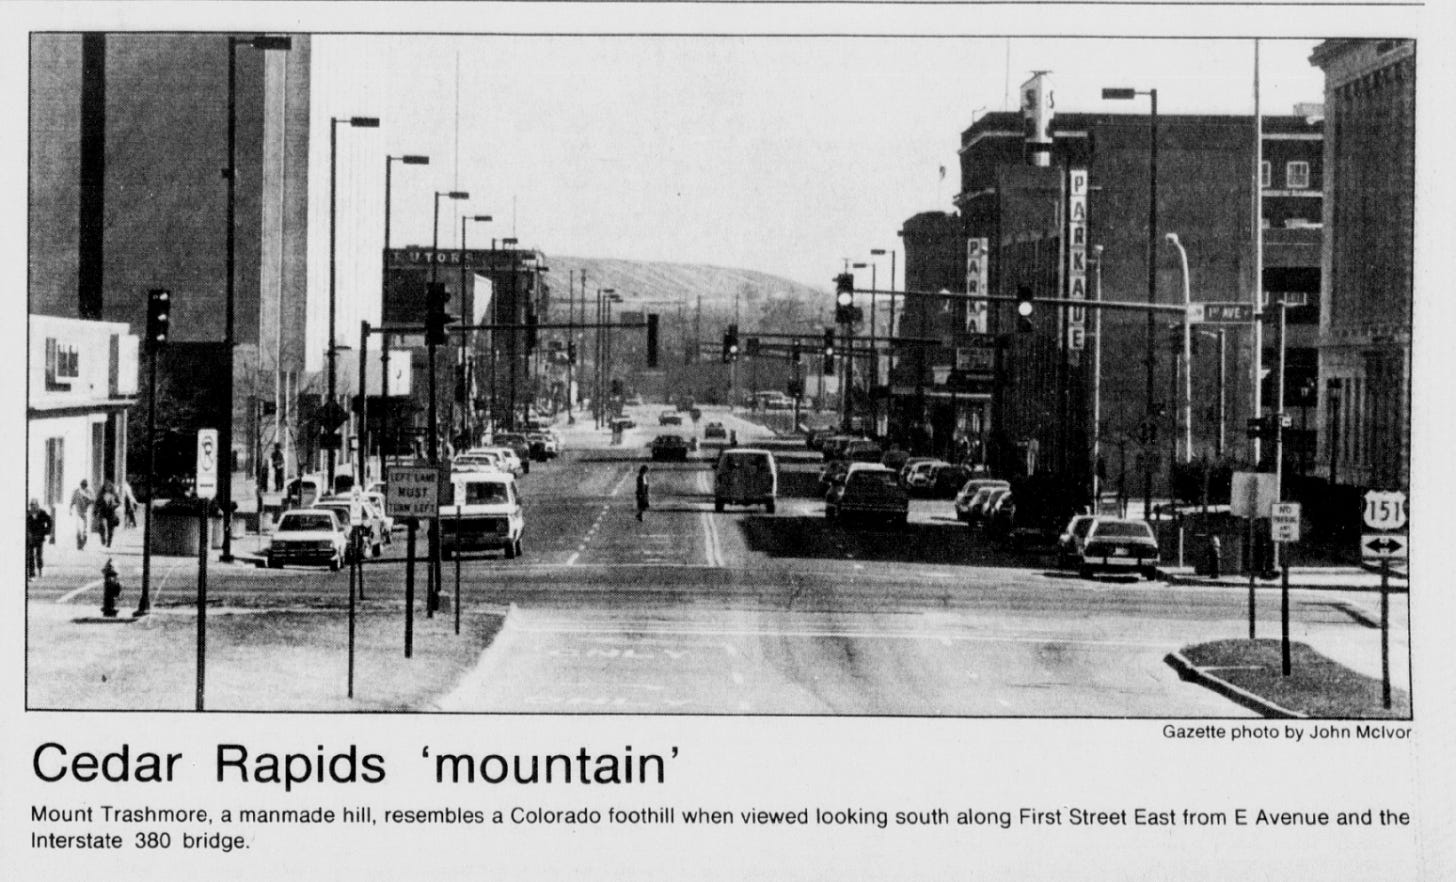 Gazette newspaper clipping with photo of Mount Trashmore at the end of a city block. Caption: Cedar Rapids ‘mountain’: Mount Trashmore, a manmade mountain, resembles a Colorado foothill when viewed looking south along First Street East from E Avenue and the Interstate 380 bridge.